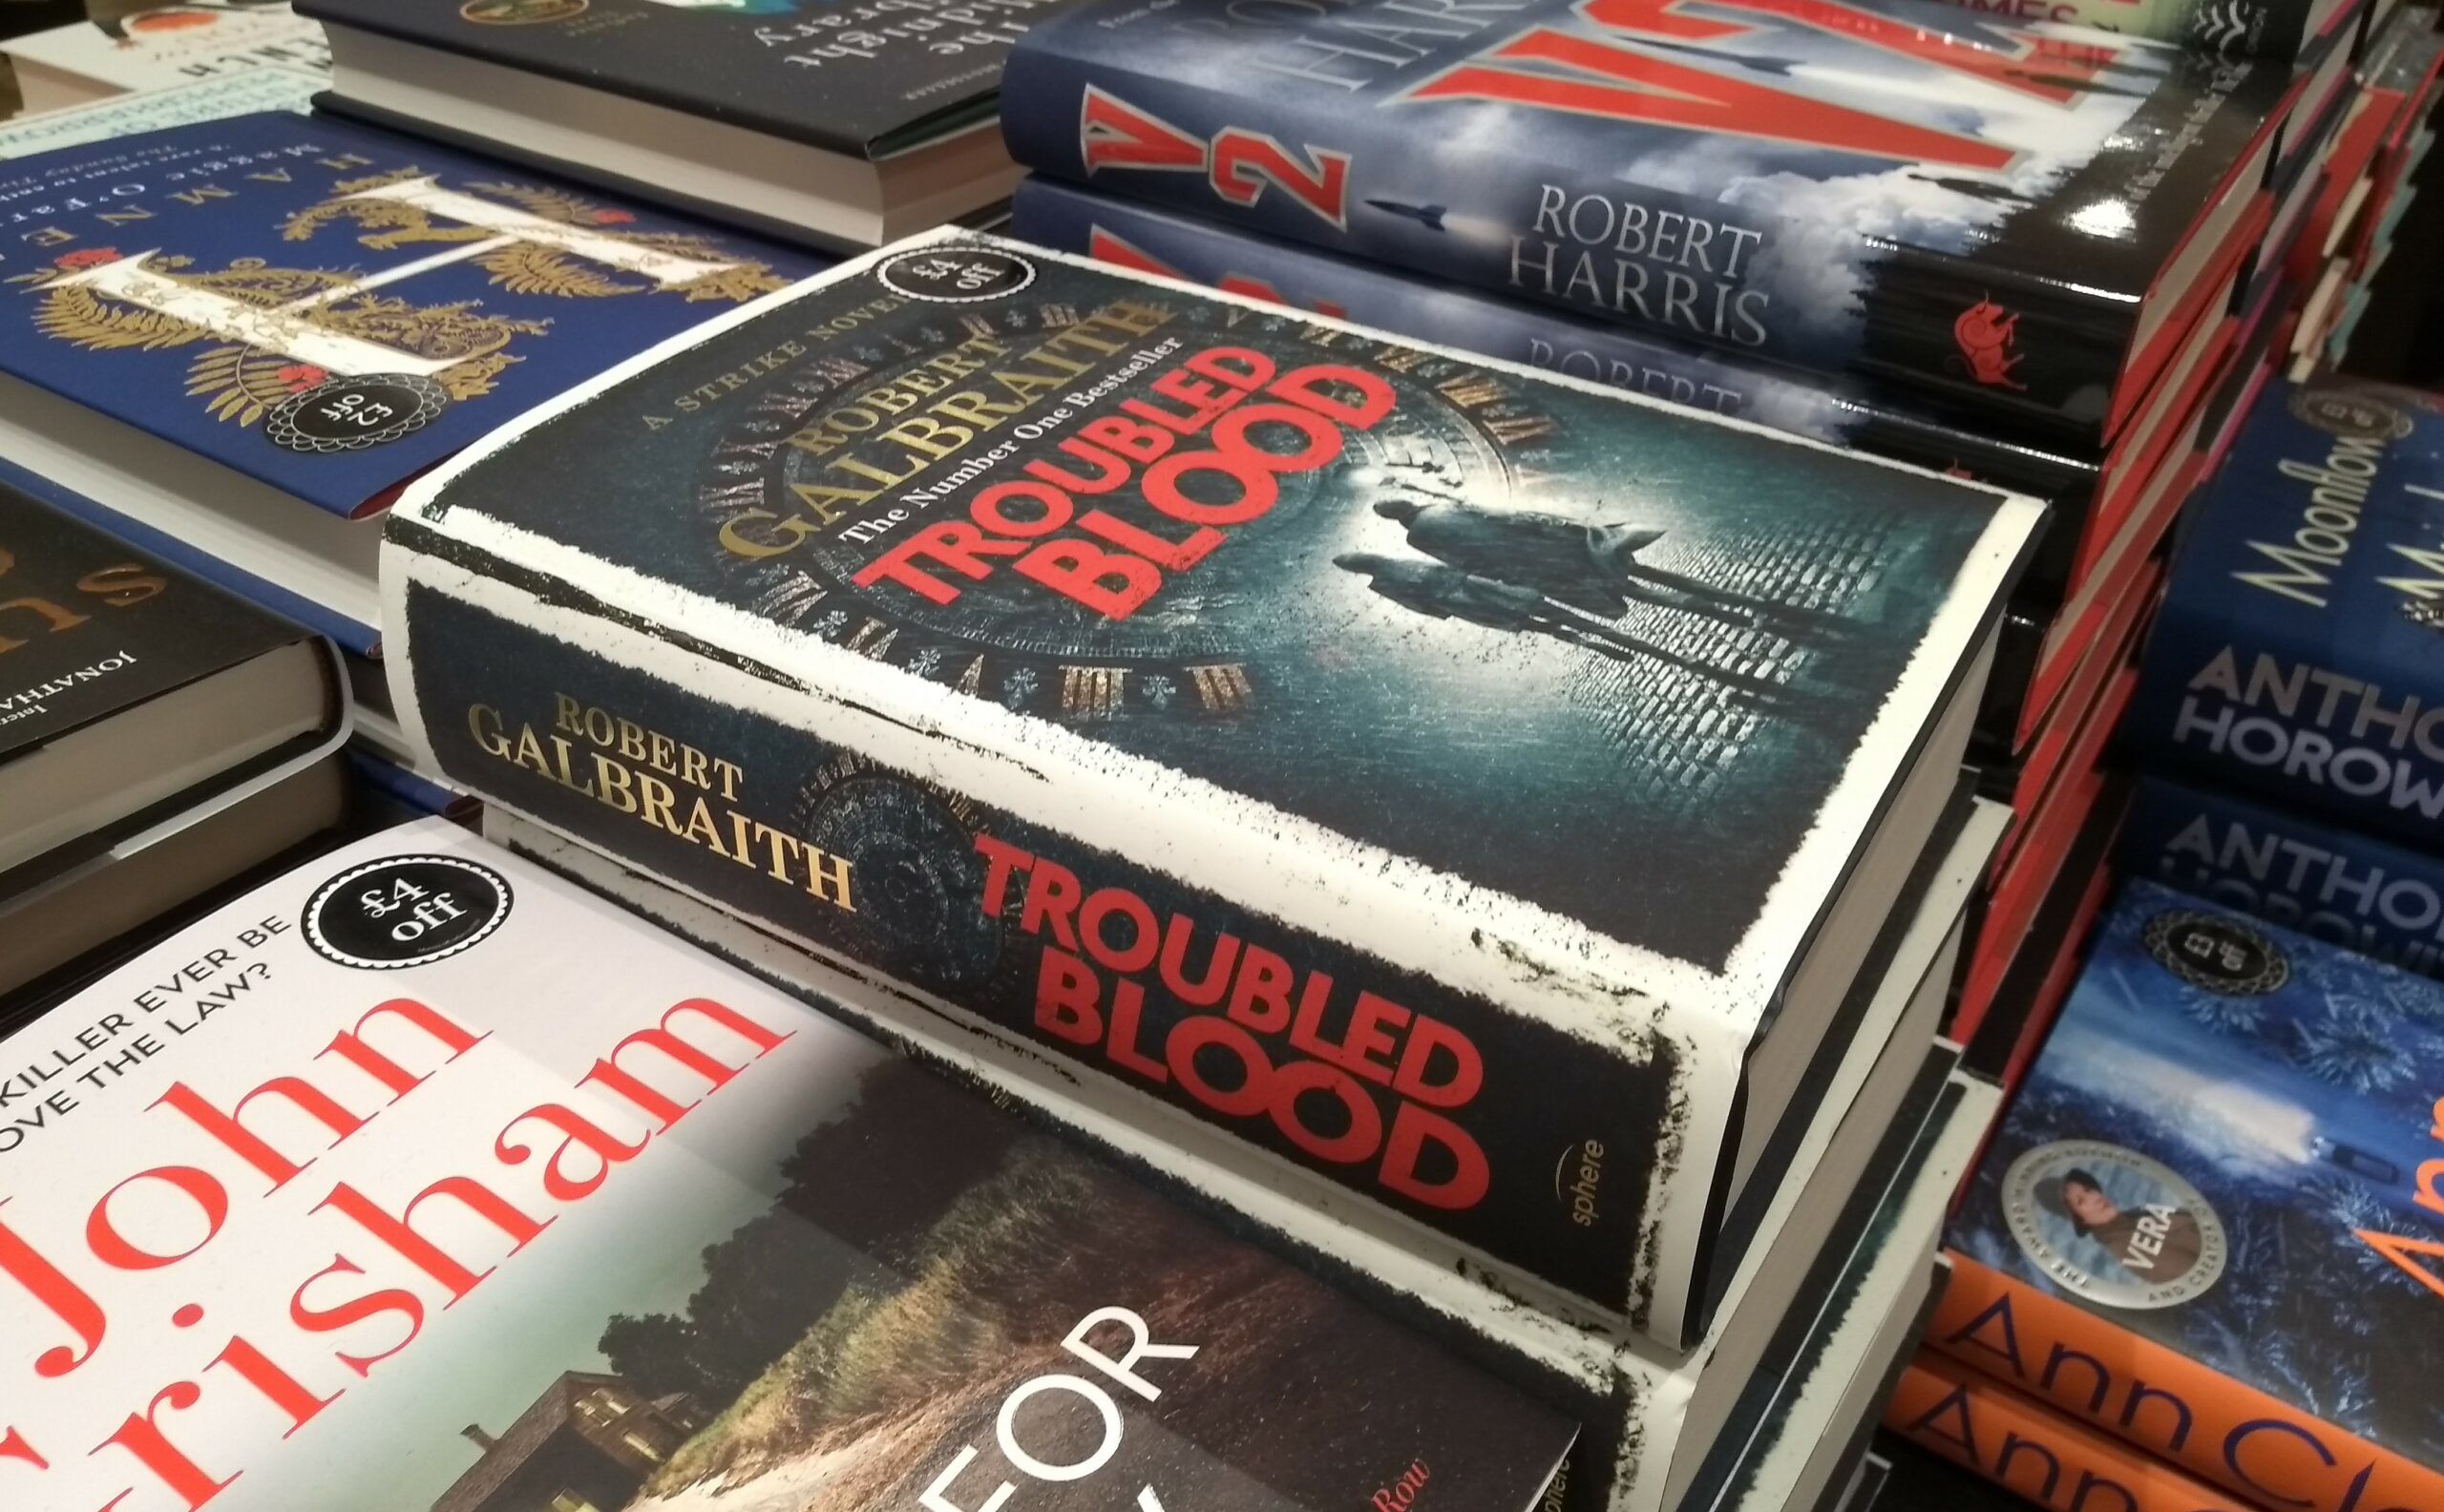 Troubled Blood on sale in bookshop